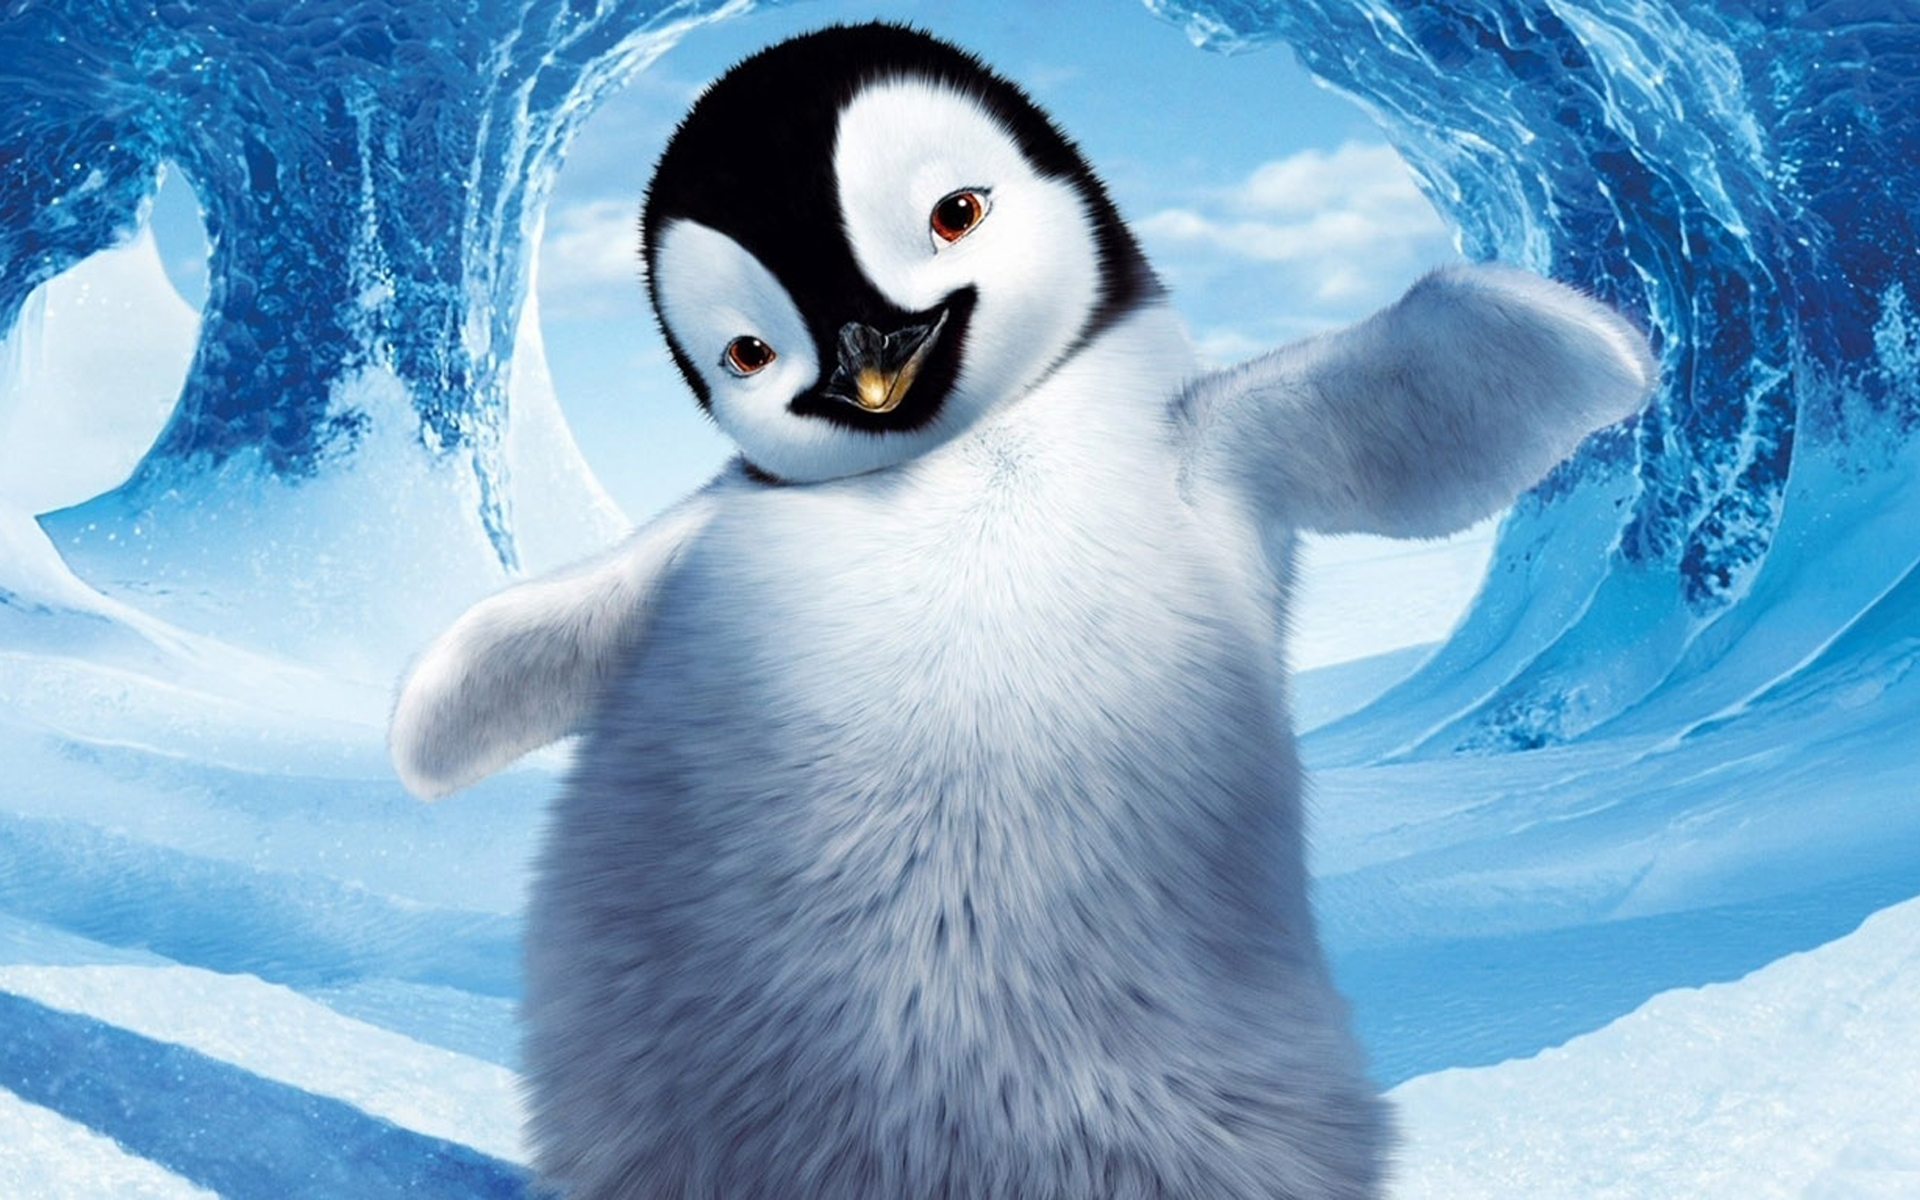 Happy Penguin wallpapers and images wallpapers pictures photos